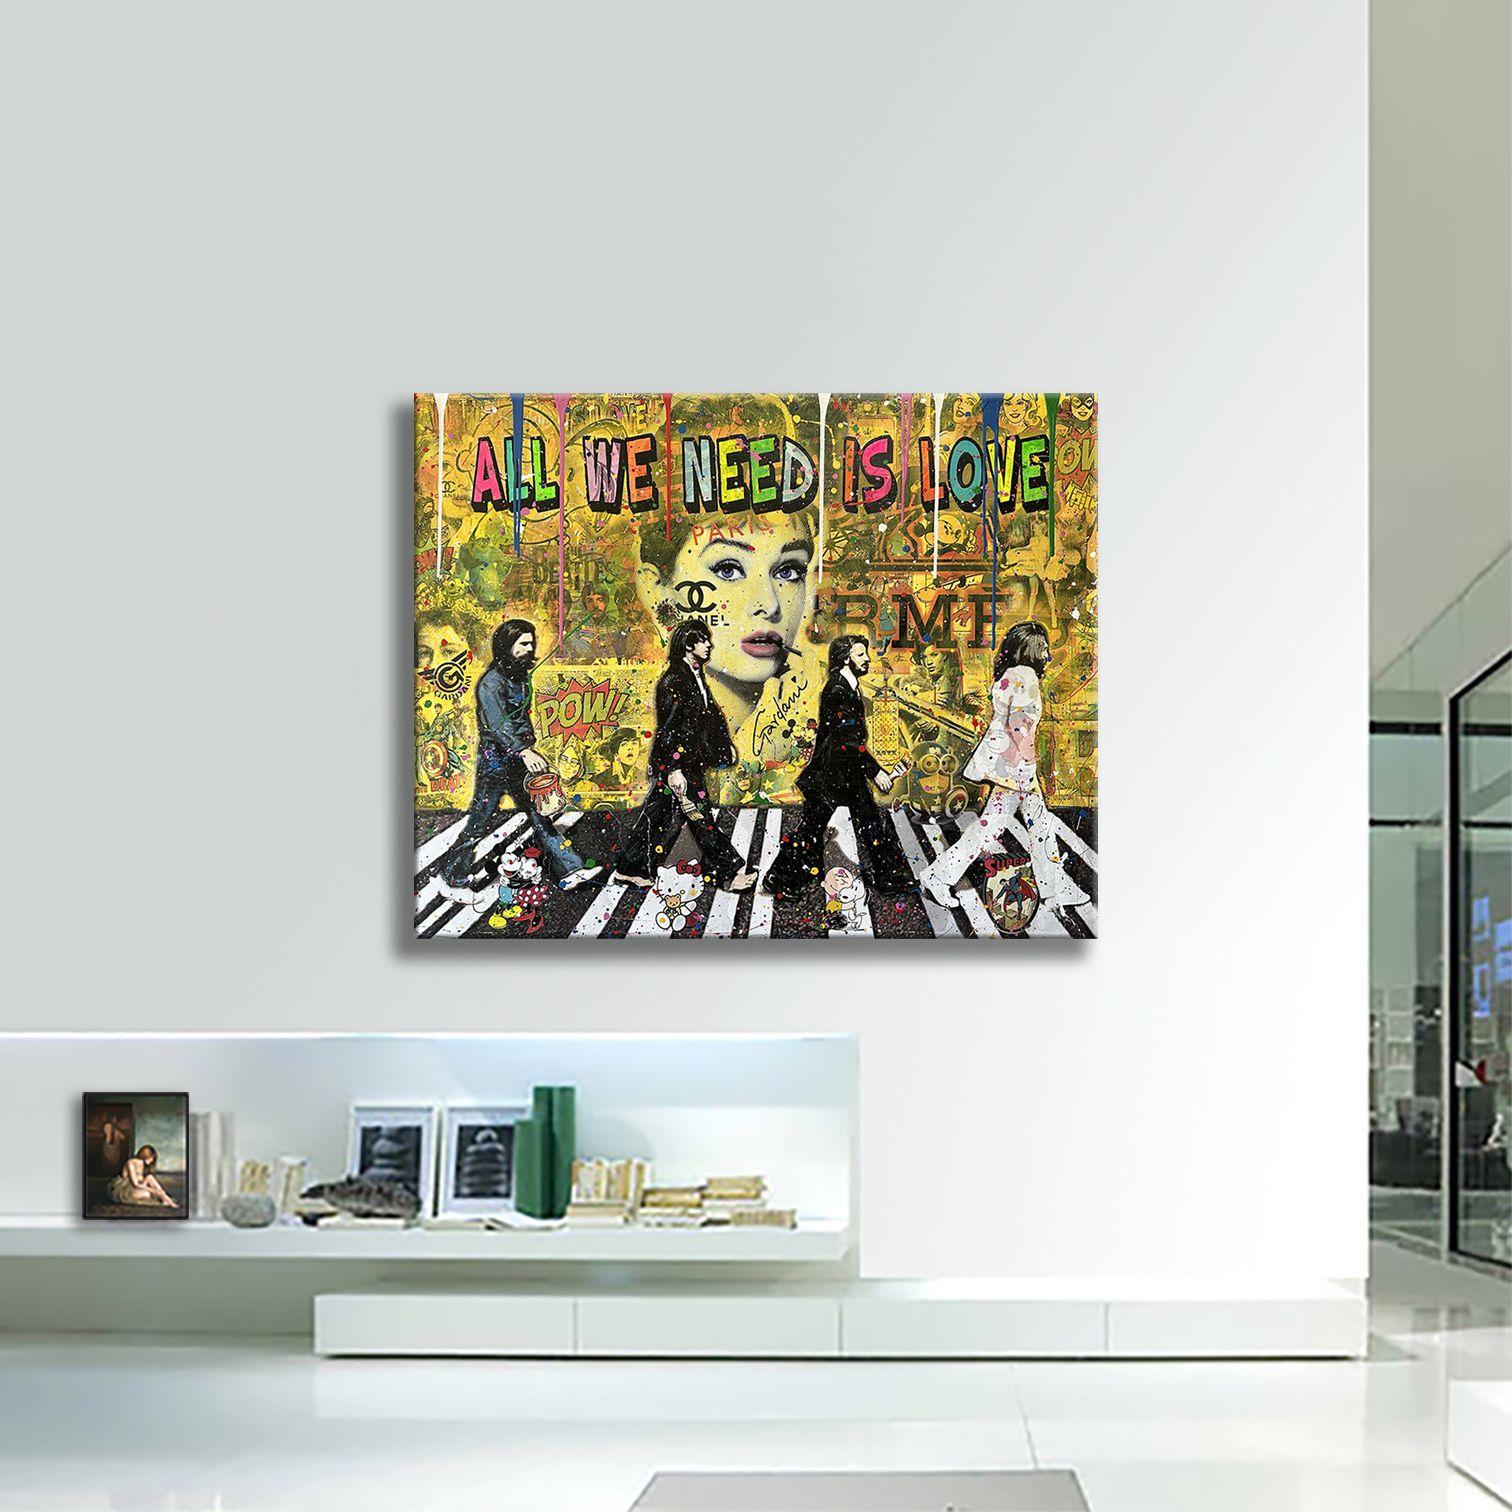 Each morning Beatles â€“ Original Painting on canvas, Painting, Acrylic on Canva For Sale 2